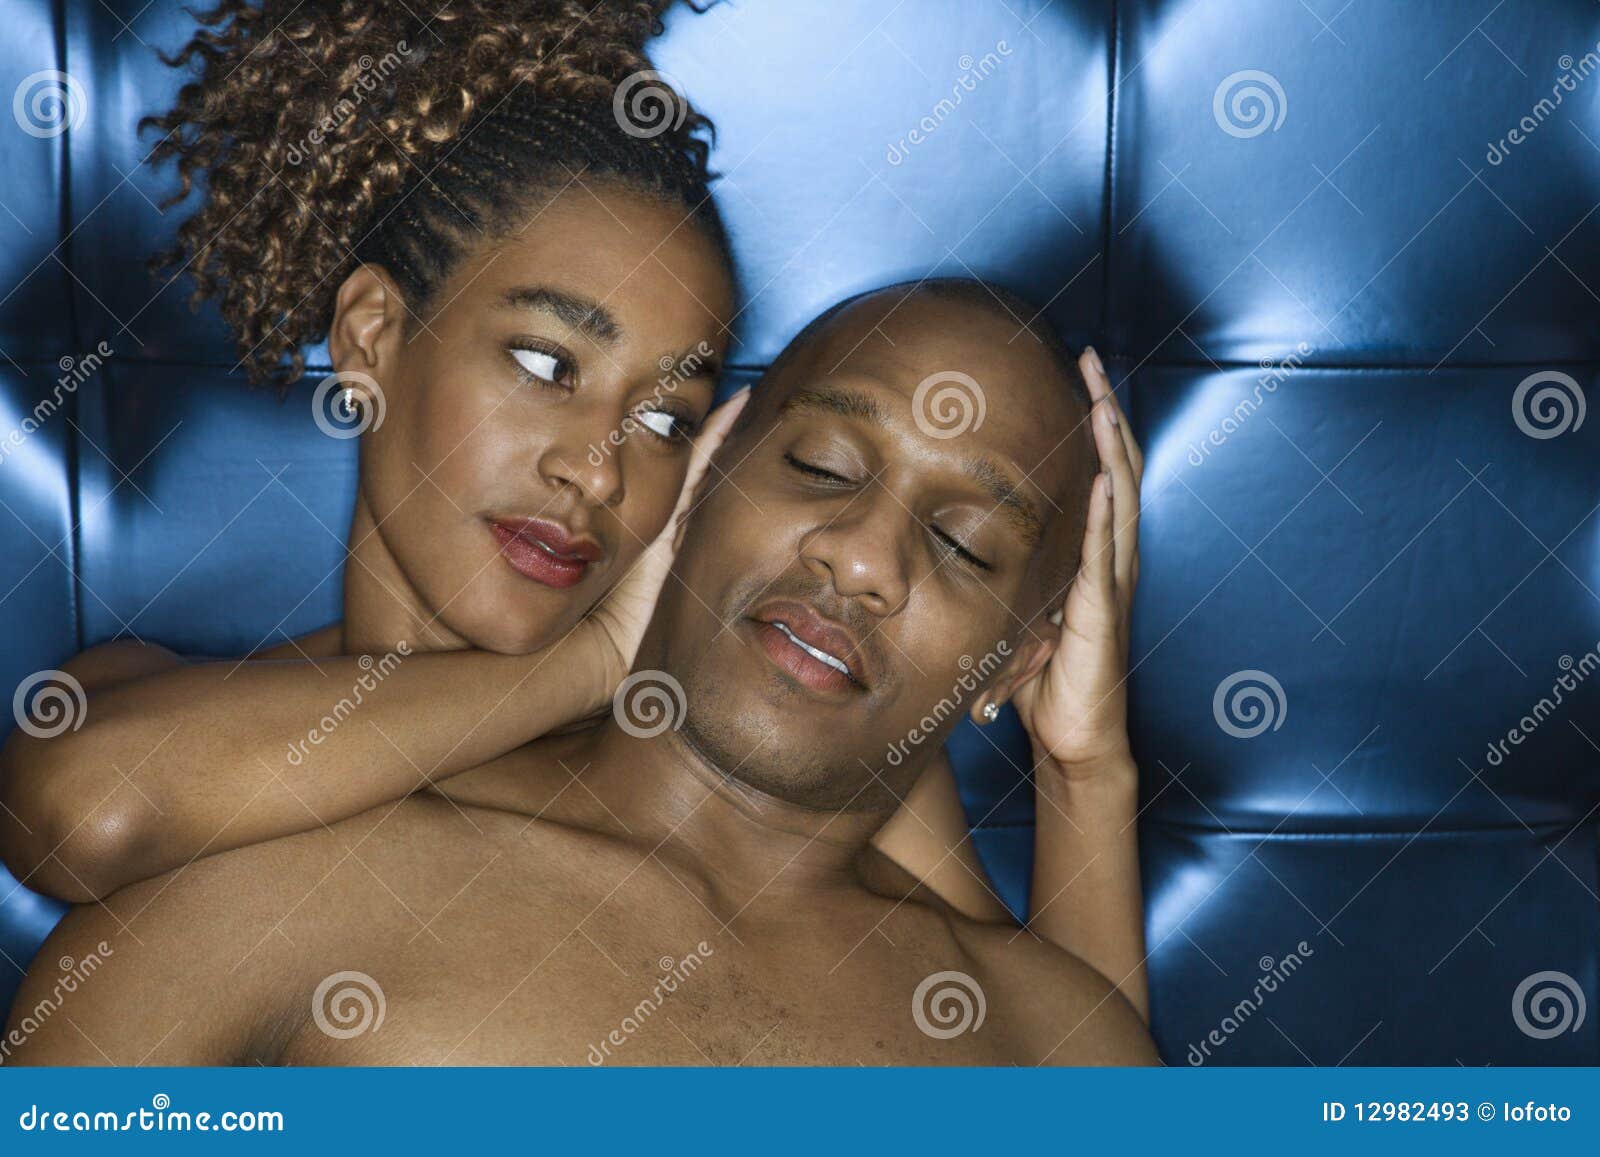 Attractive Young Couple Sharing a Tender Moment Stock Image